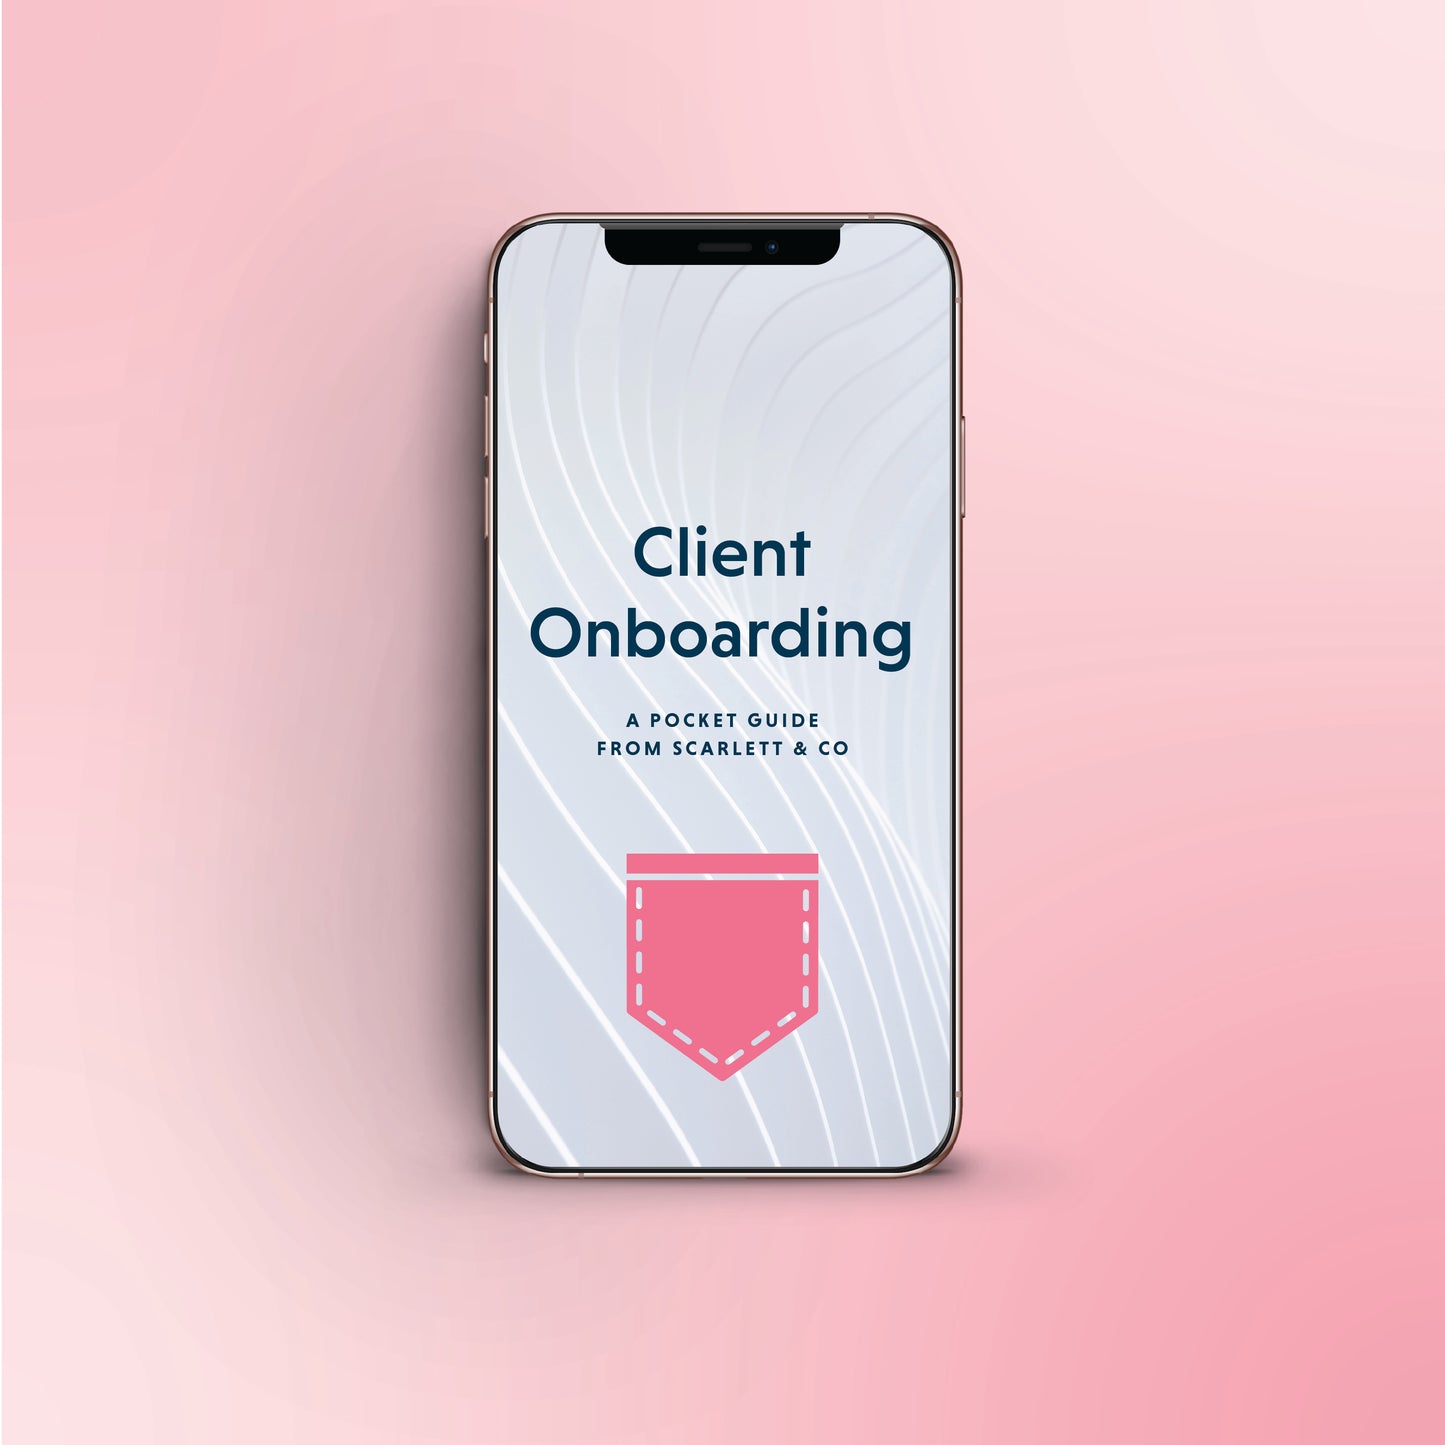 Client Onboarding: A Pocket Guide